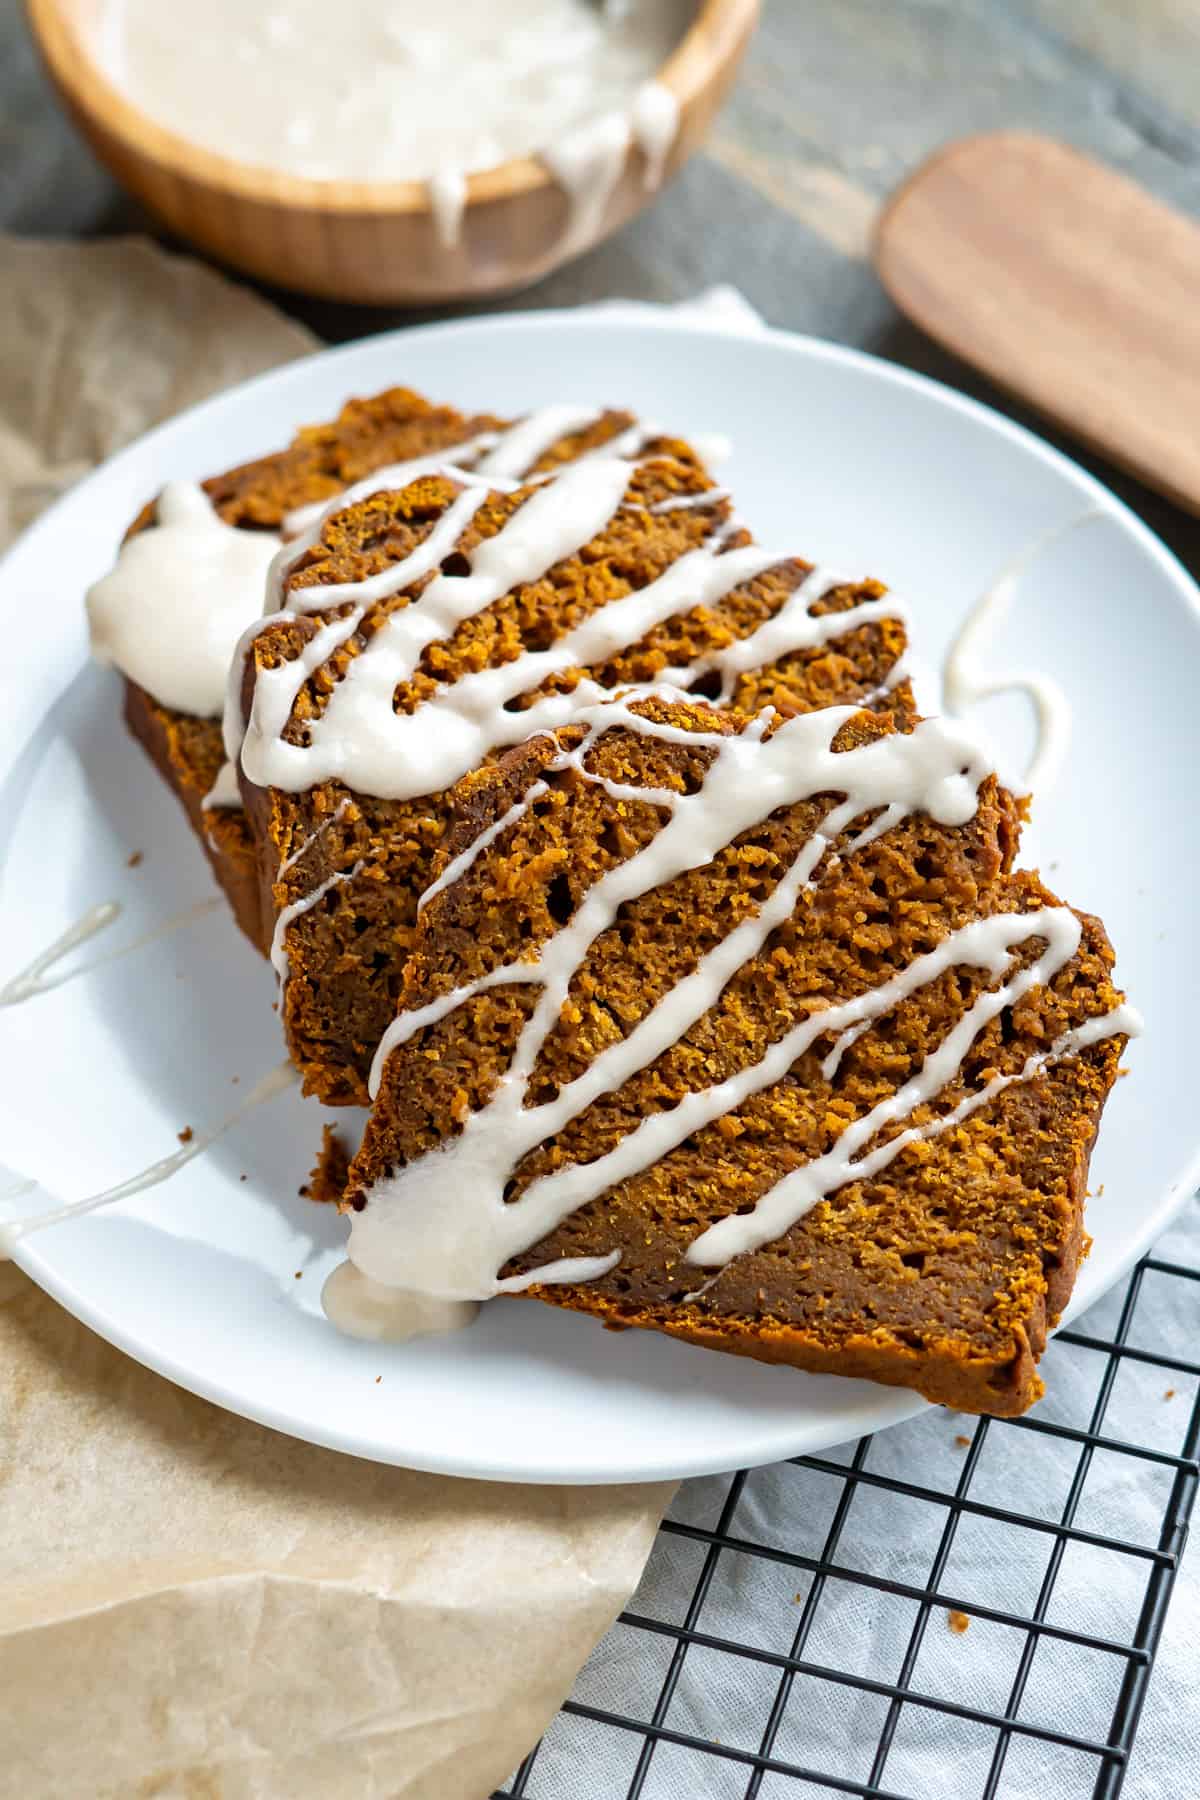 Three slices of gluten free pumpkin bread drizzled with icing on a plate.